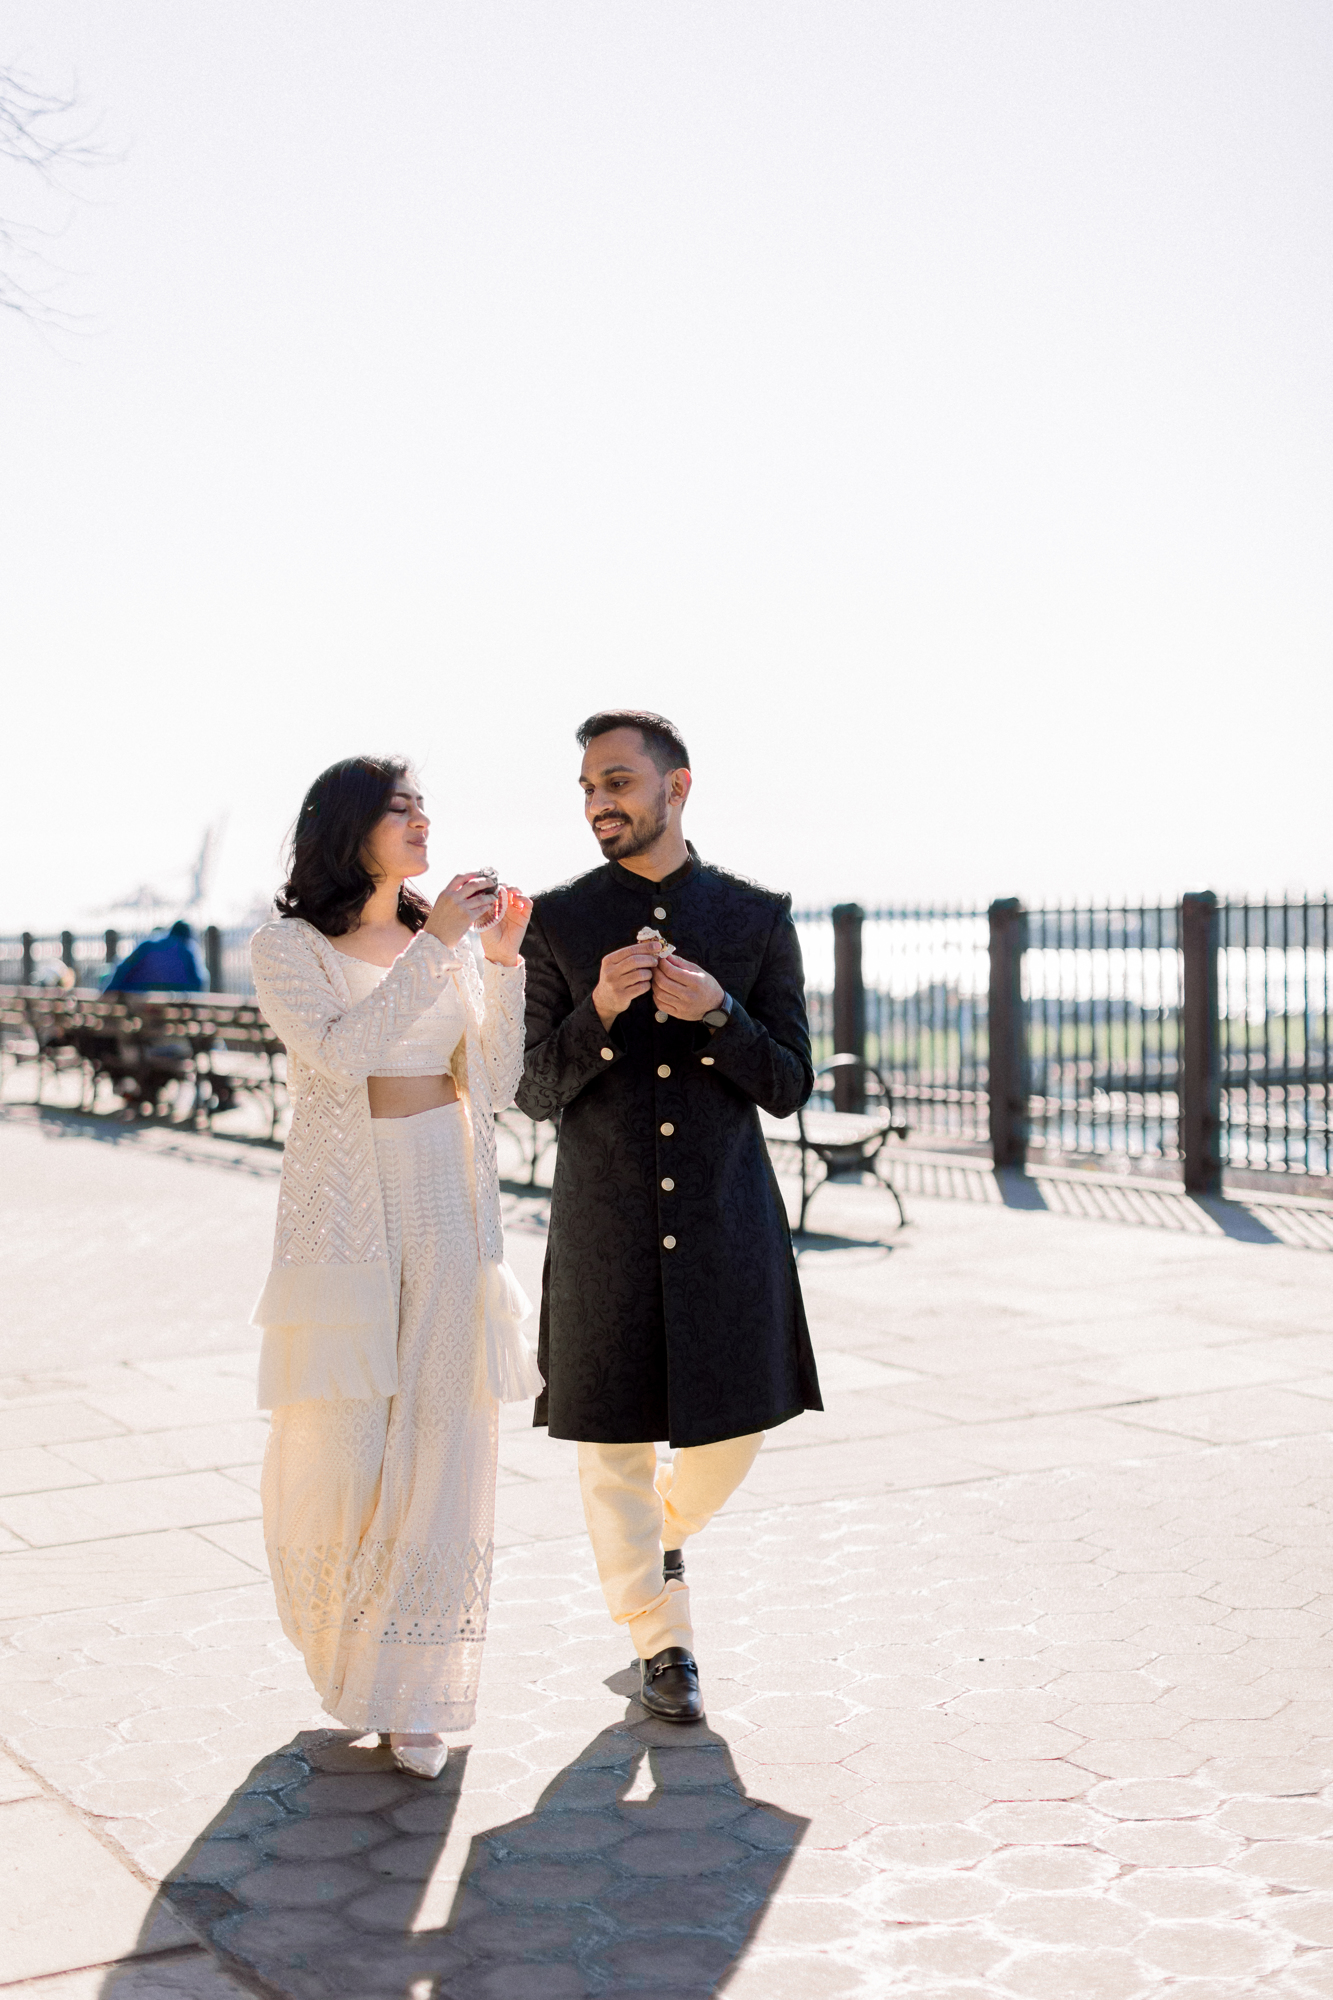 Lovely and Wintery Brooklyn Heights Promenade Engagement Photos